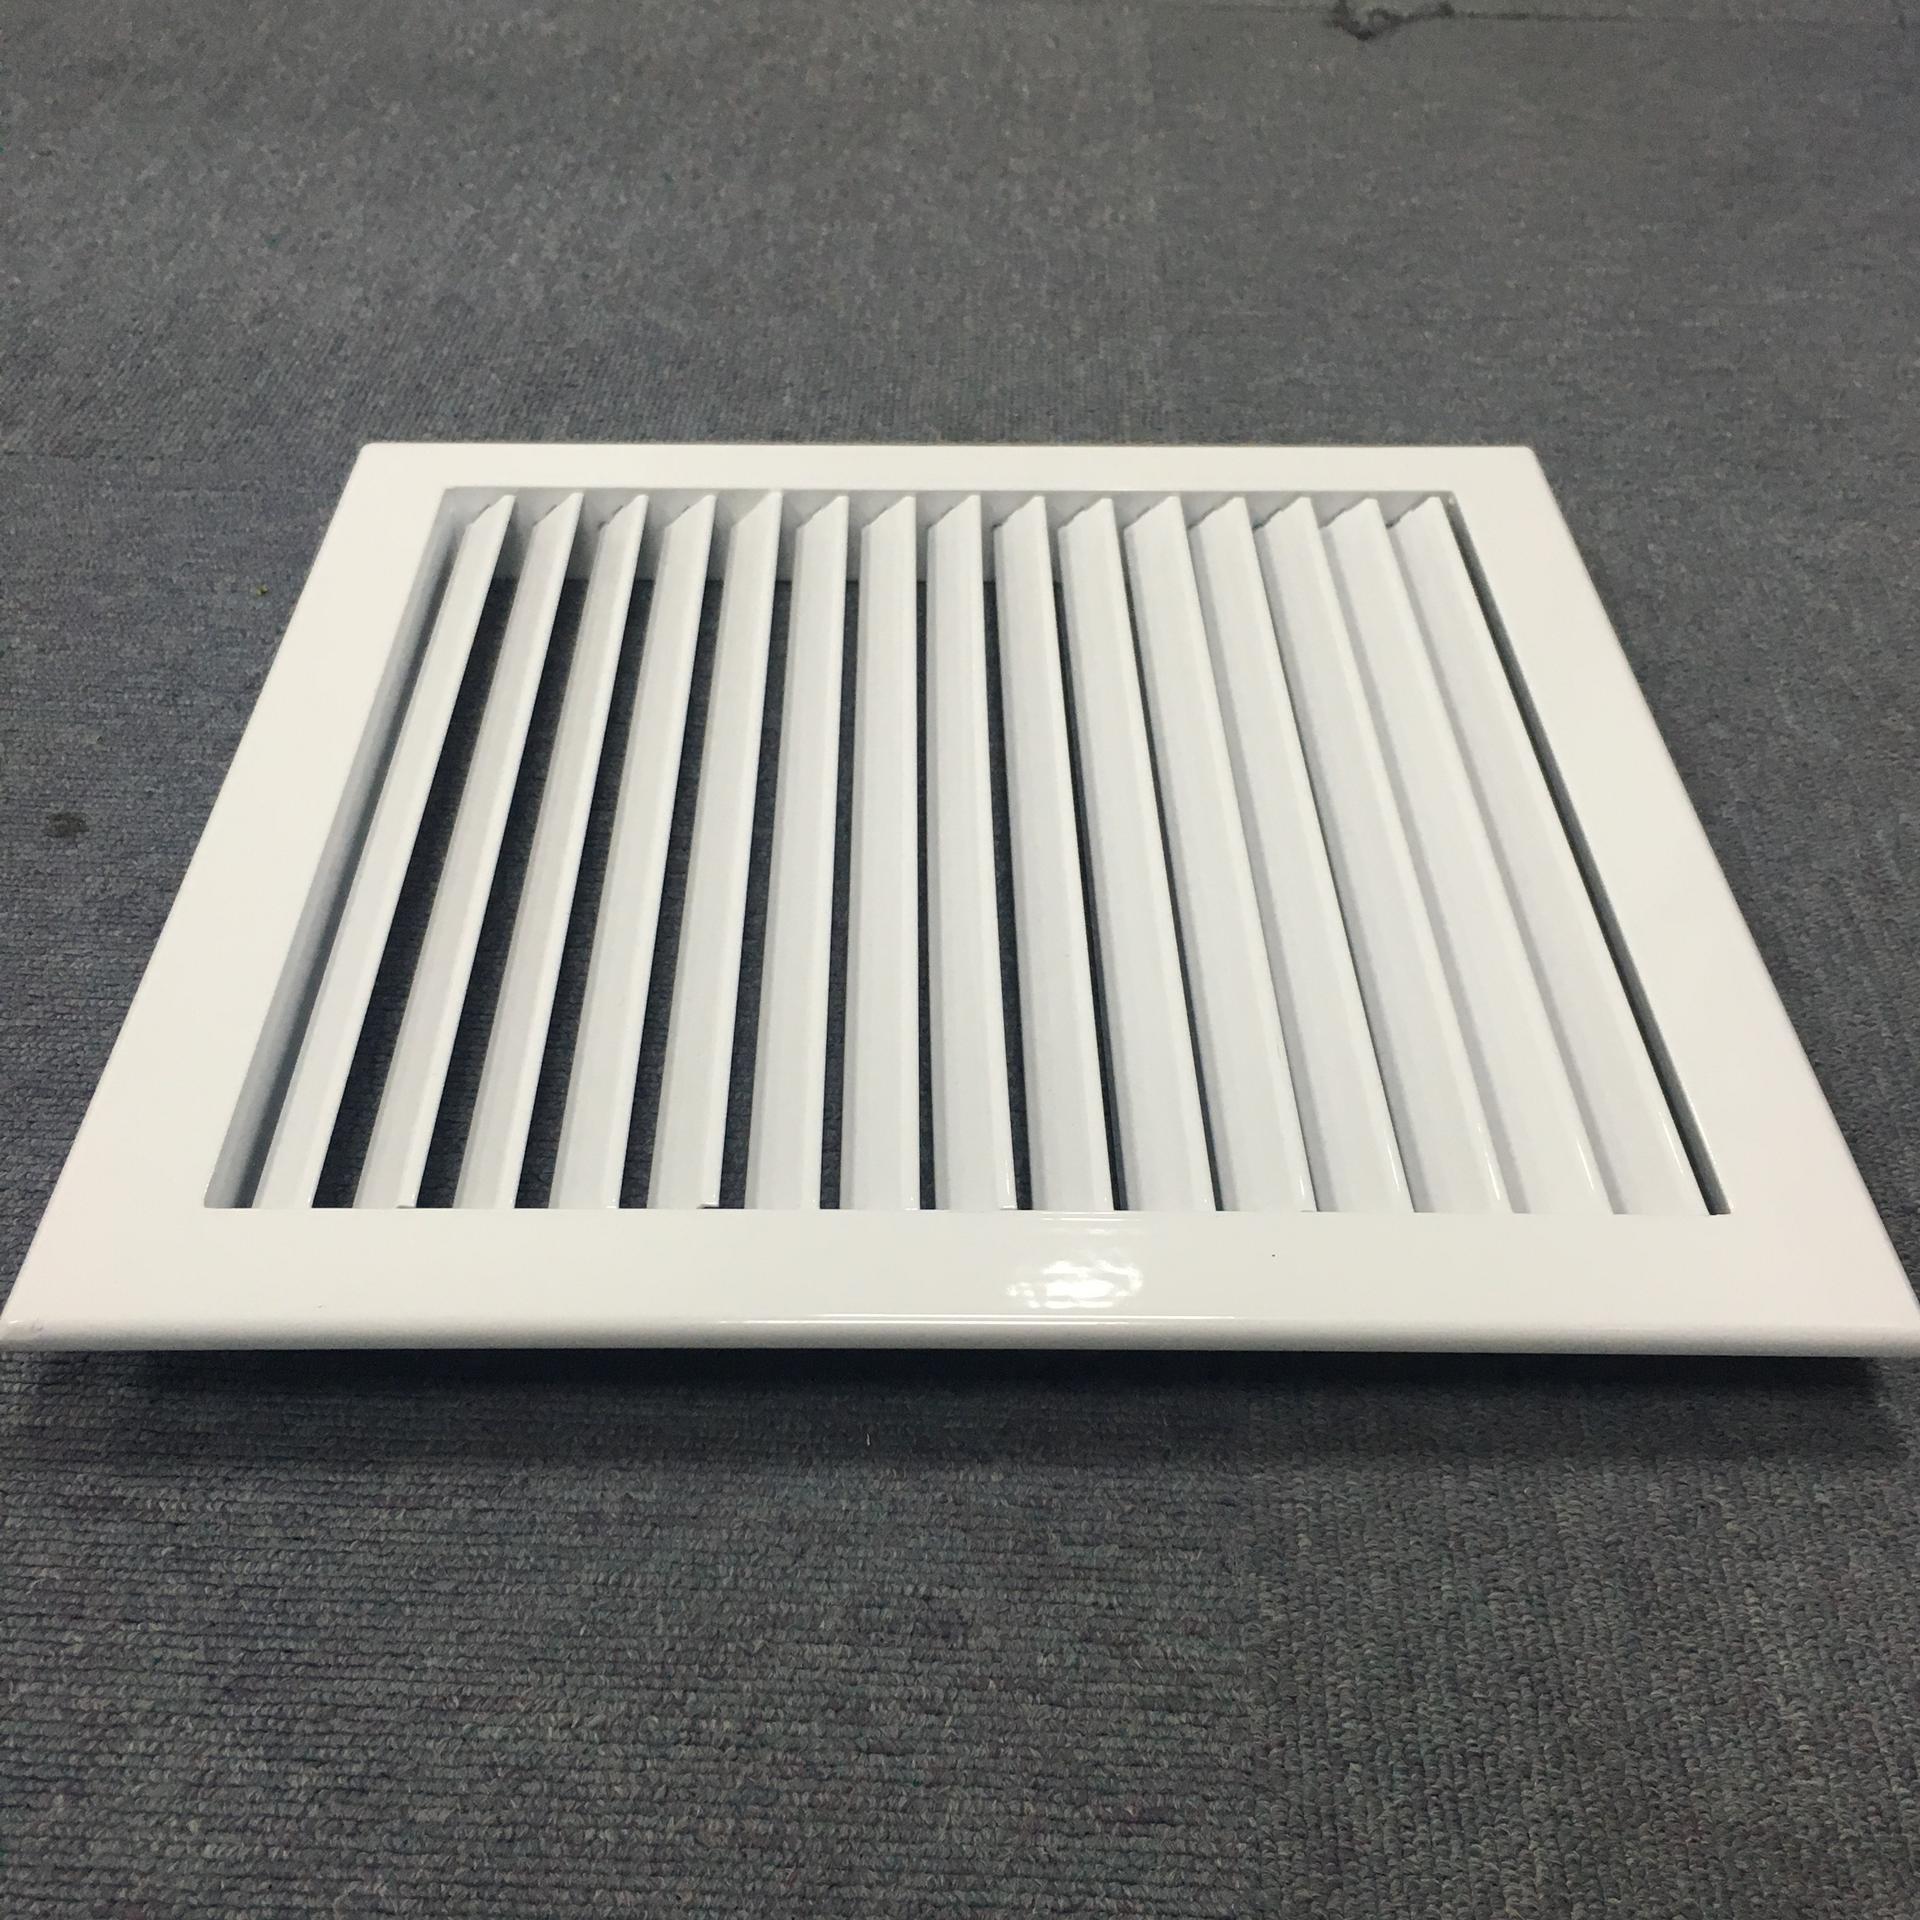 Hvac System Exhaust Air Conditioner Louver Fixed Blades Return Grille